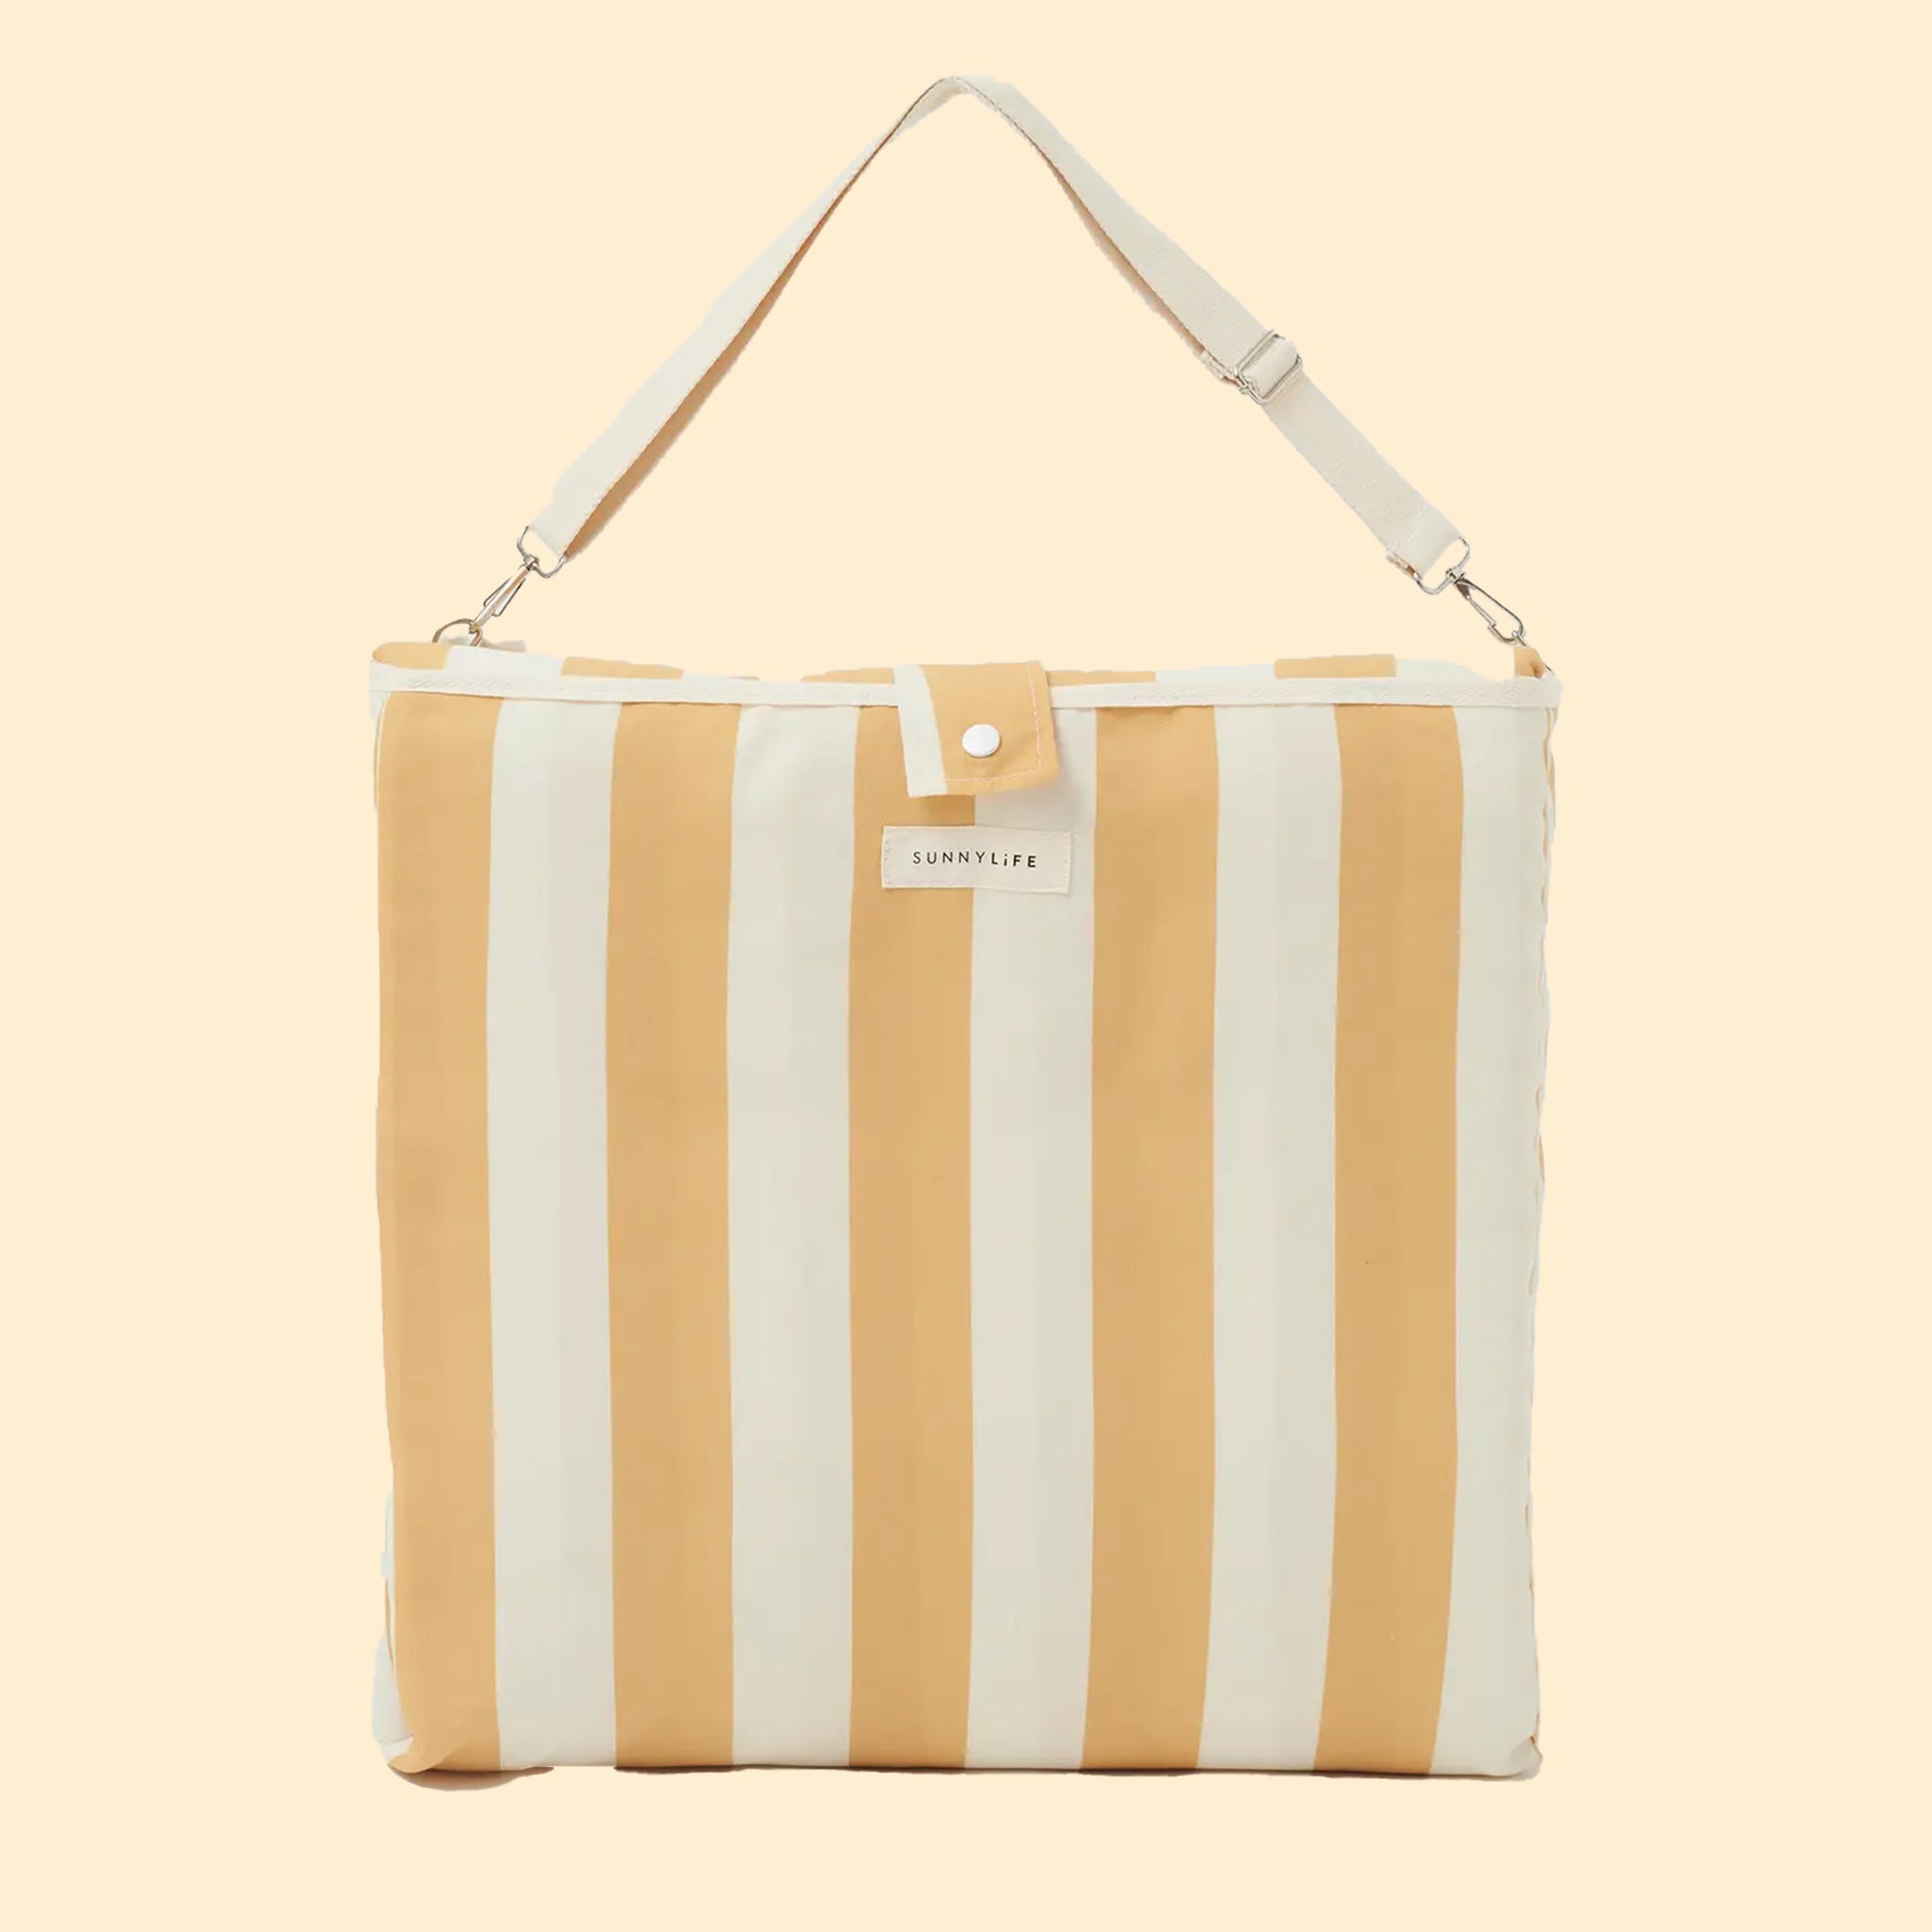 A mustard and ivory striped unfoldable beach or pool chair with folds into a compact square with a strap for carrying.